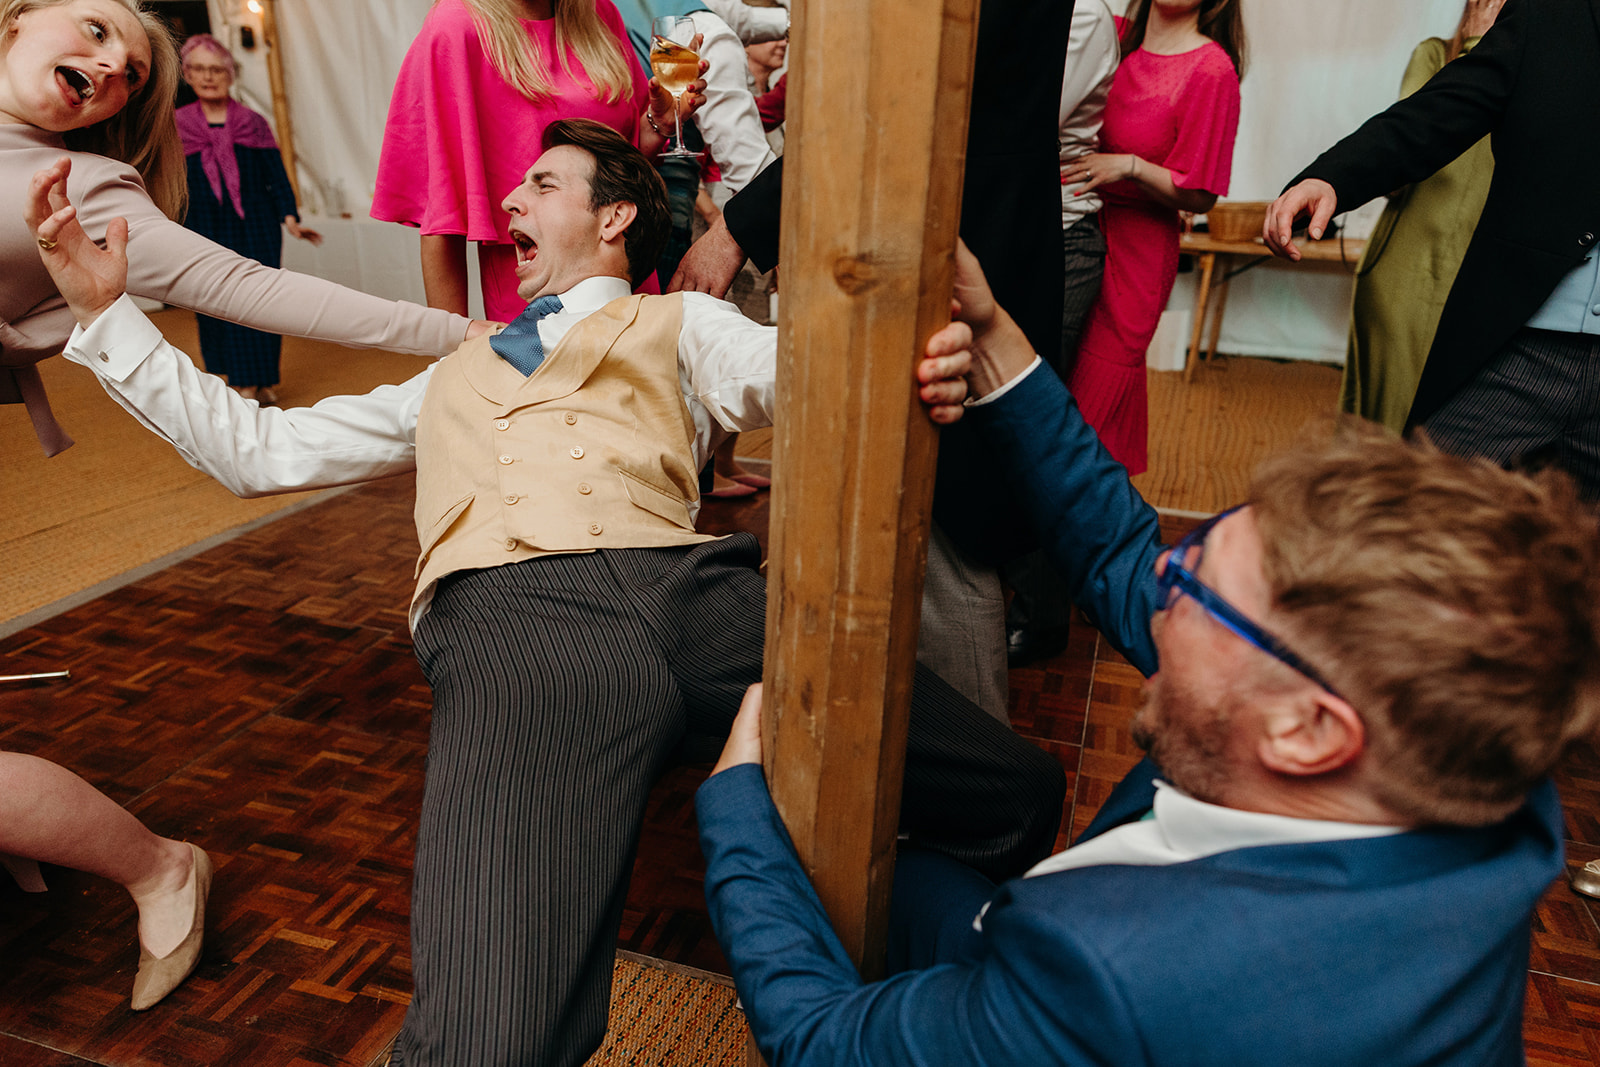 Guests showcasing occasional acrobatic feats at the East Sussex marquee wedding.